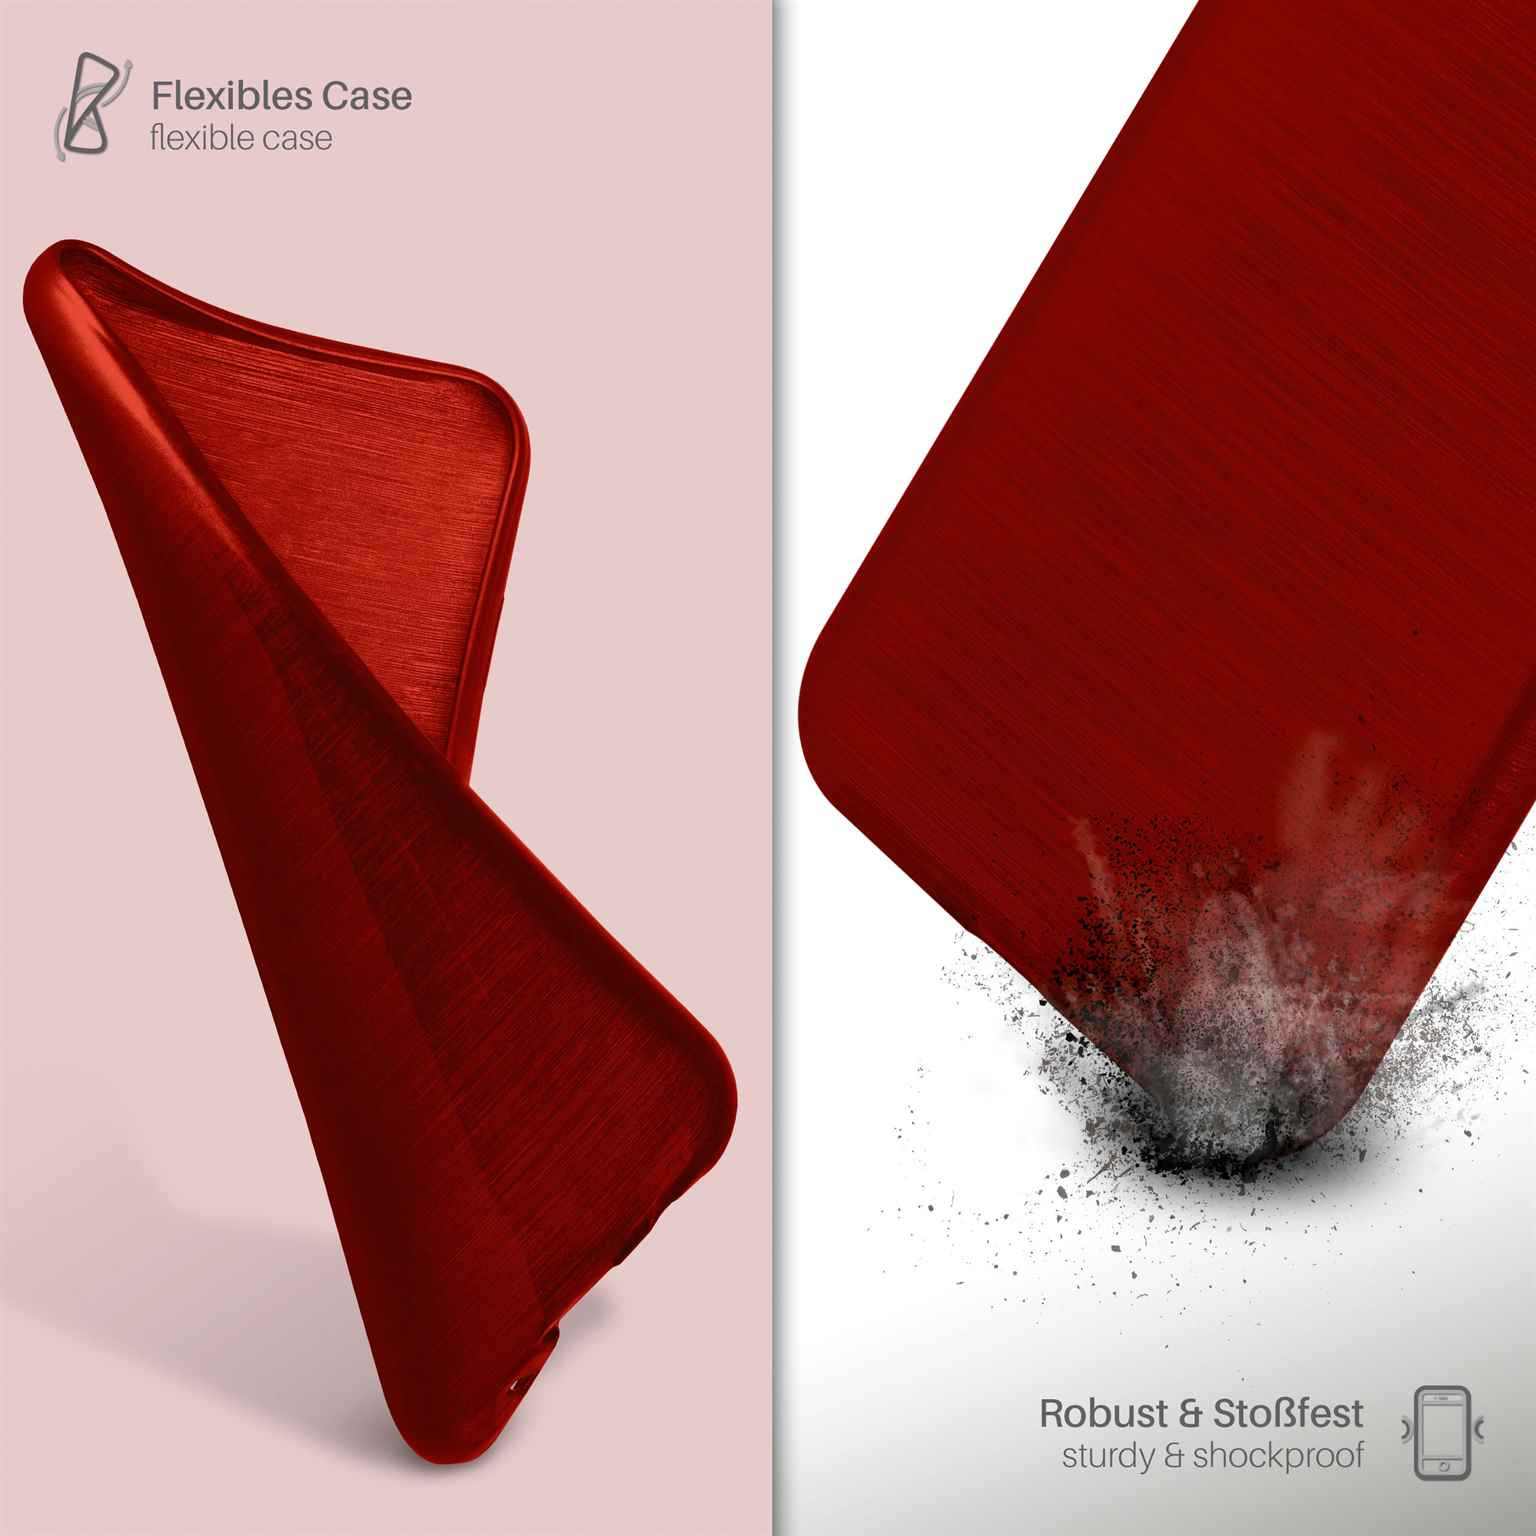 MOEX Brushed Case, Backcover, Crimson-Red S5 Galaxy Neo, Samsung